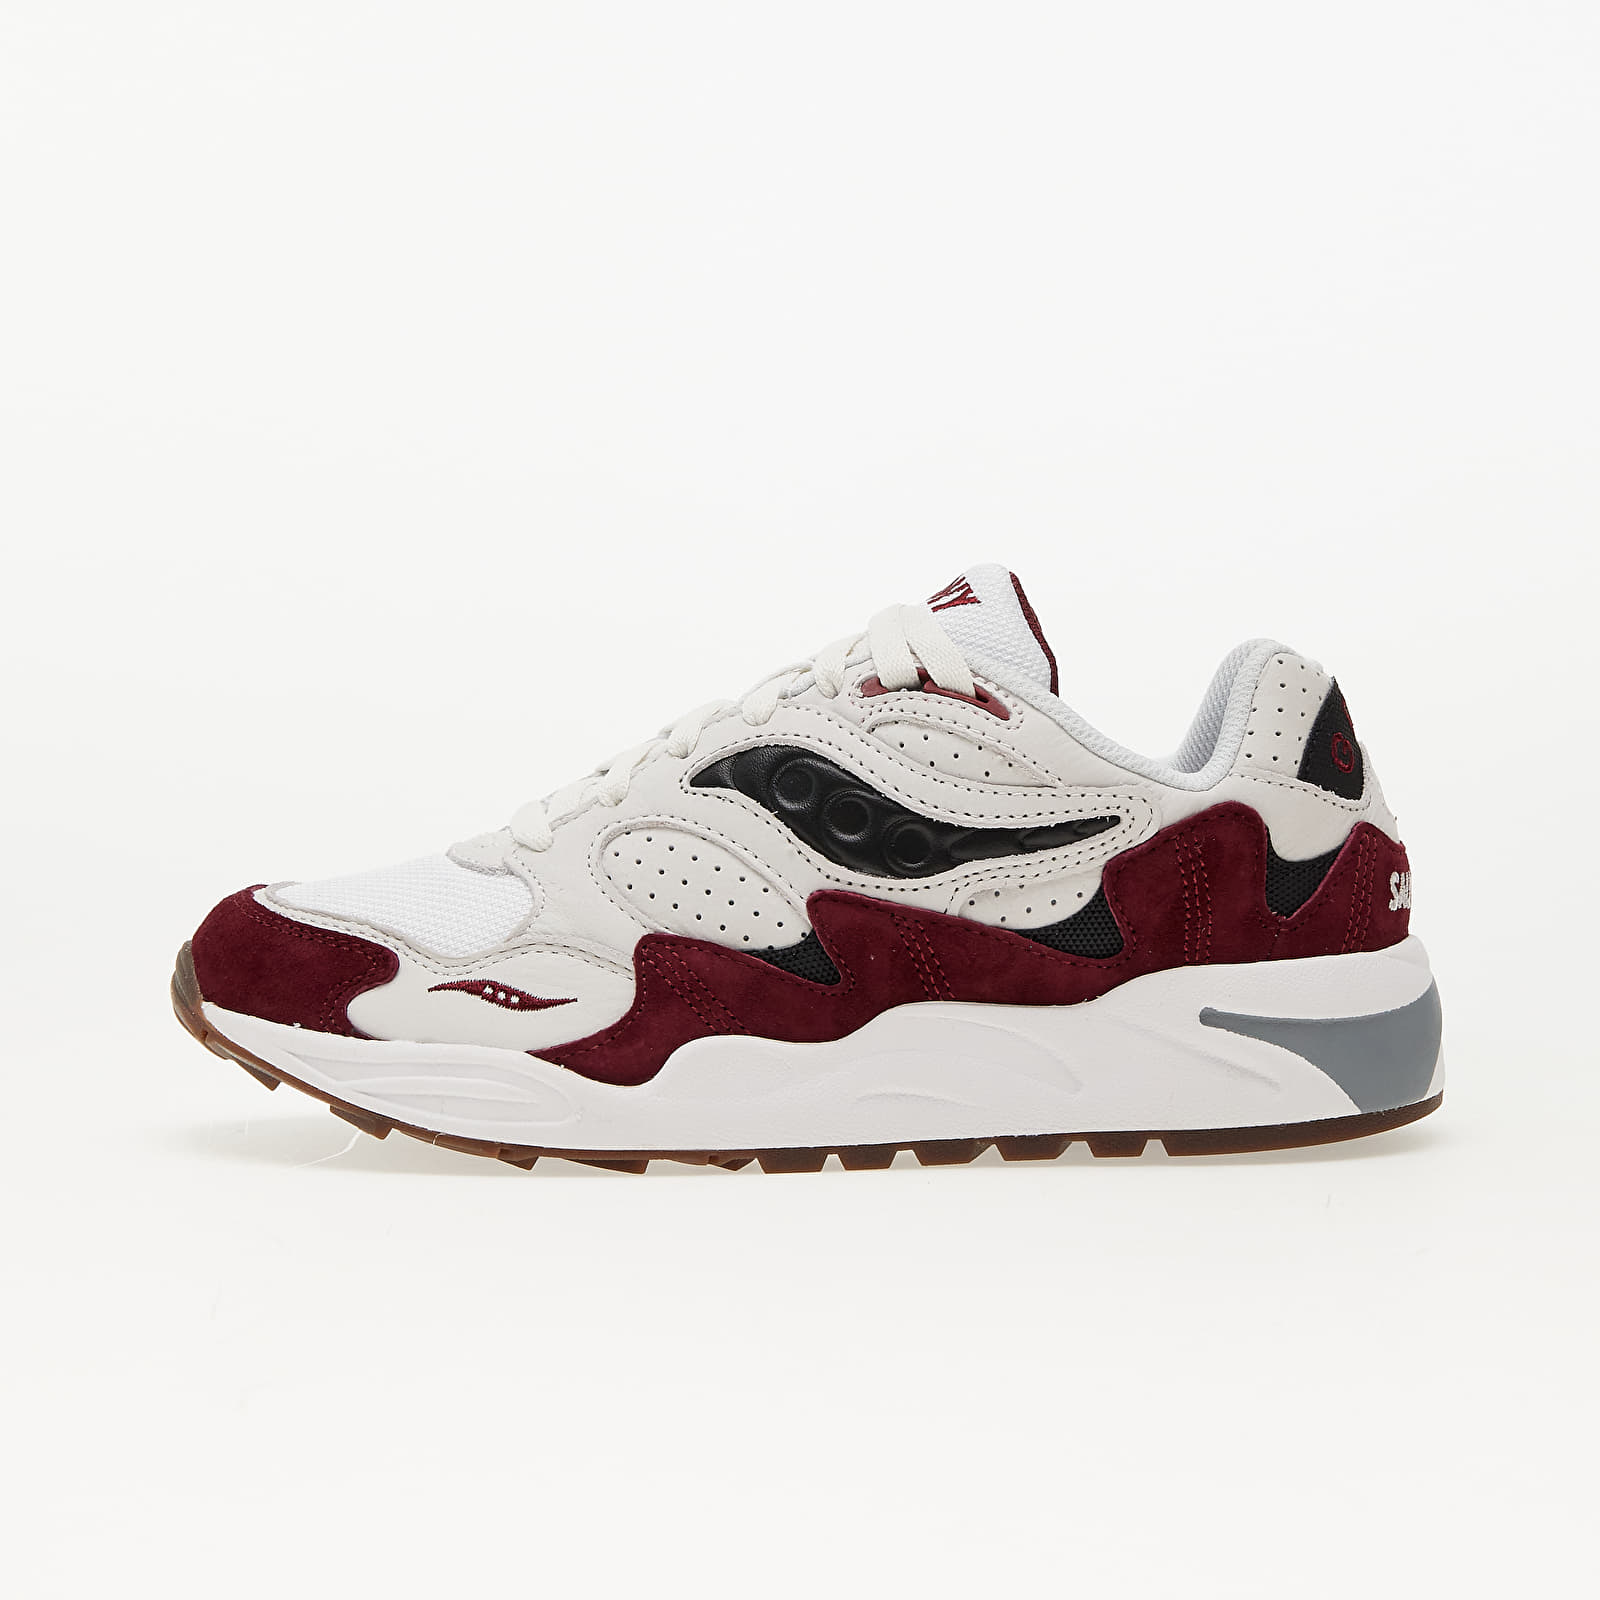 Men's shoes Saucony Grid Shadow 2 Cream/ Red